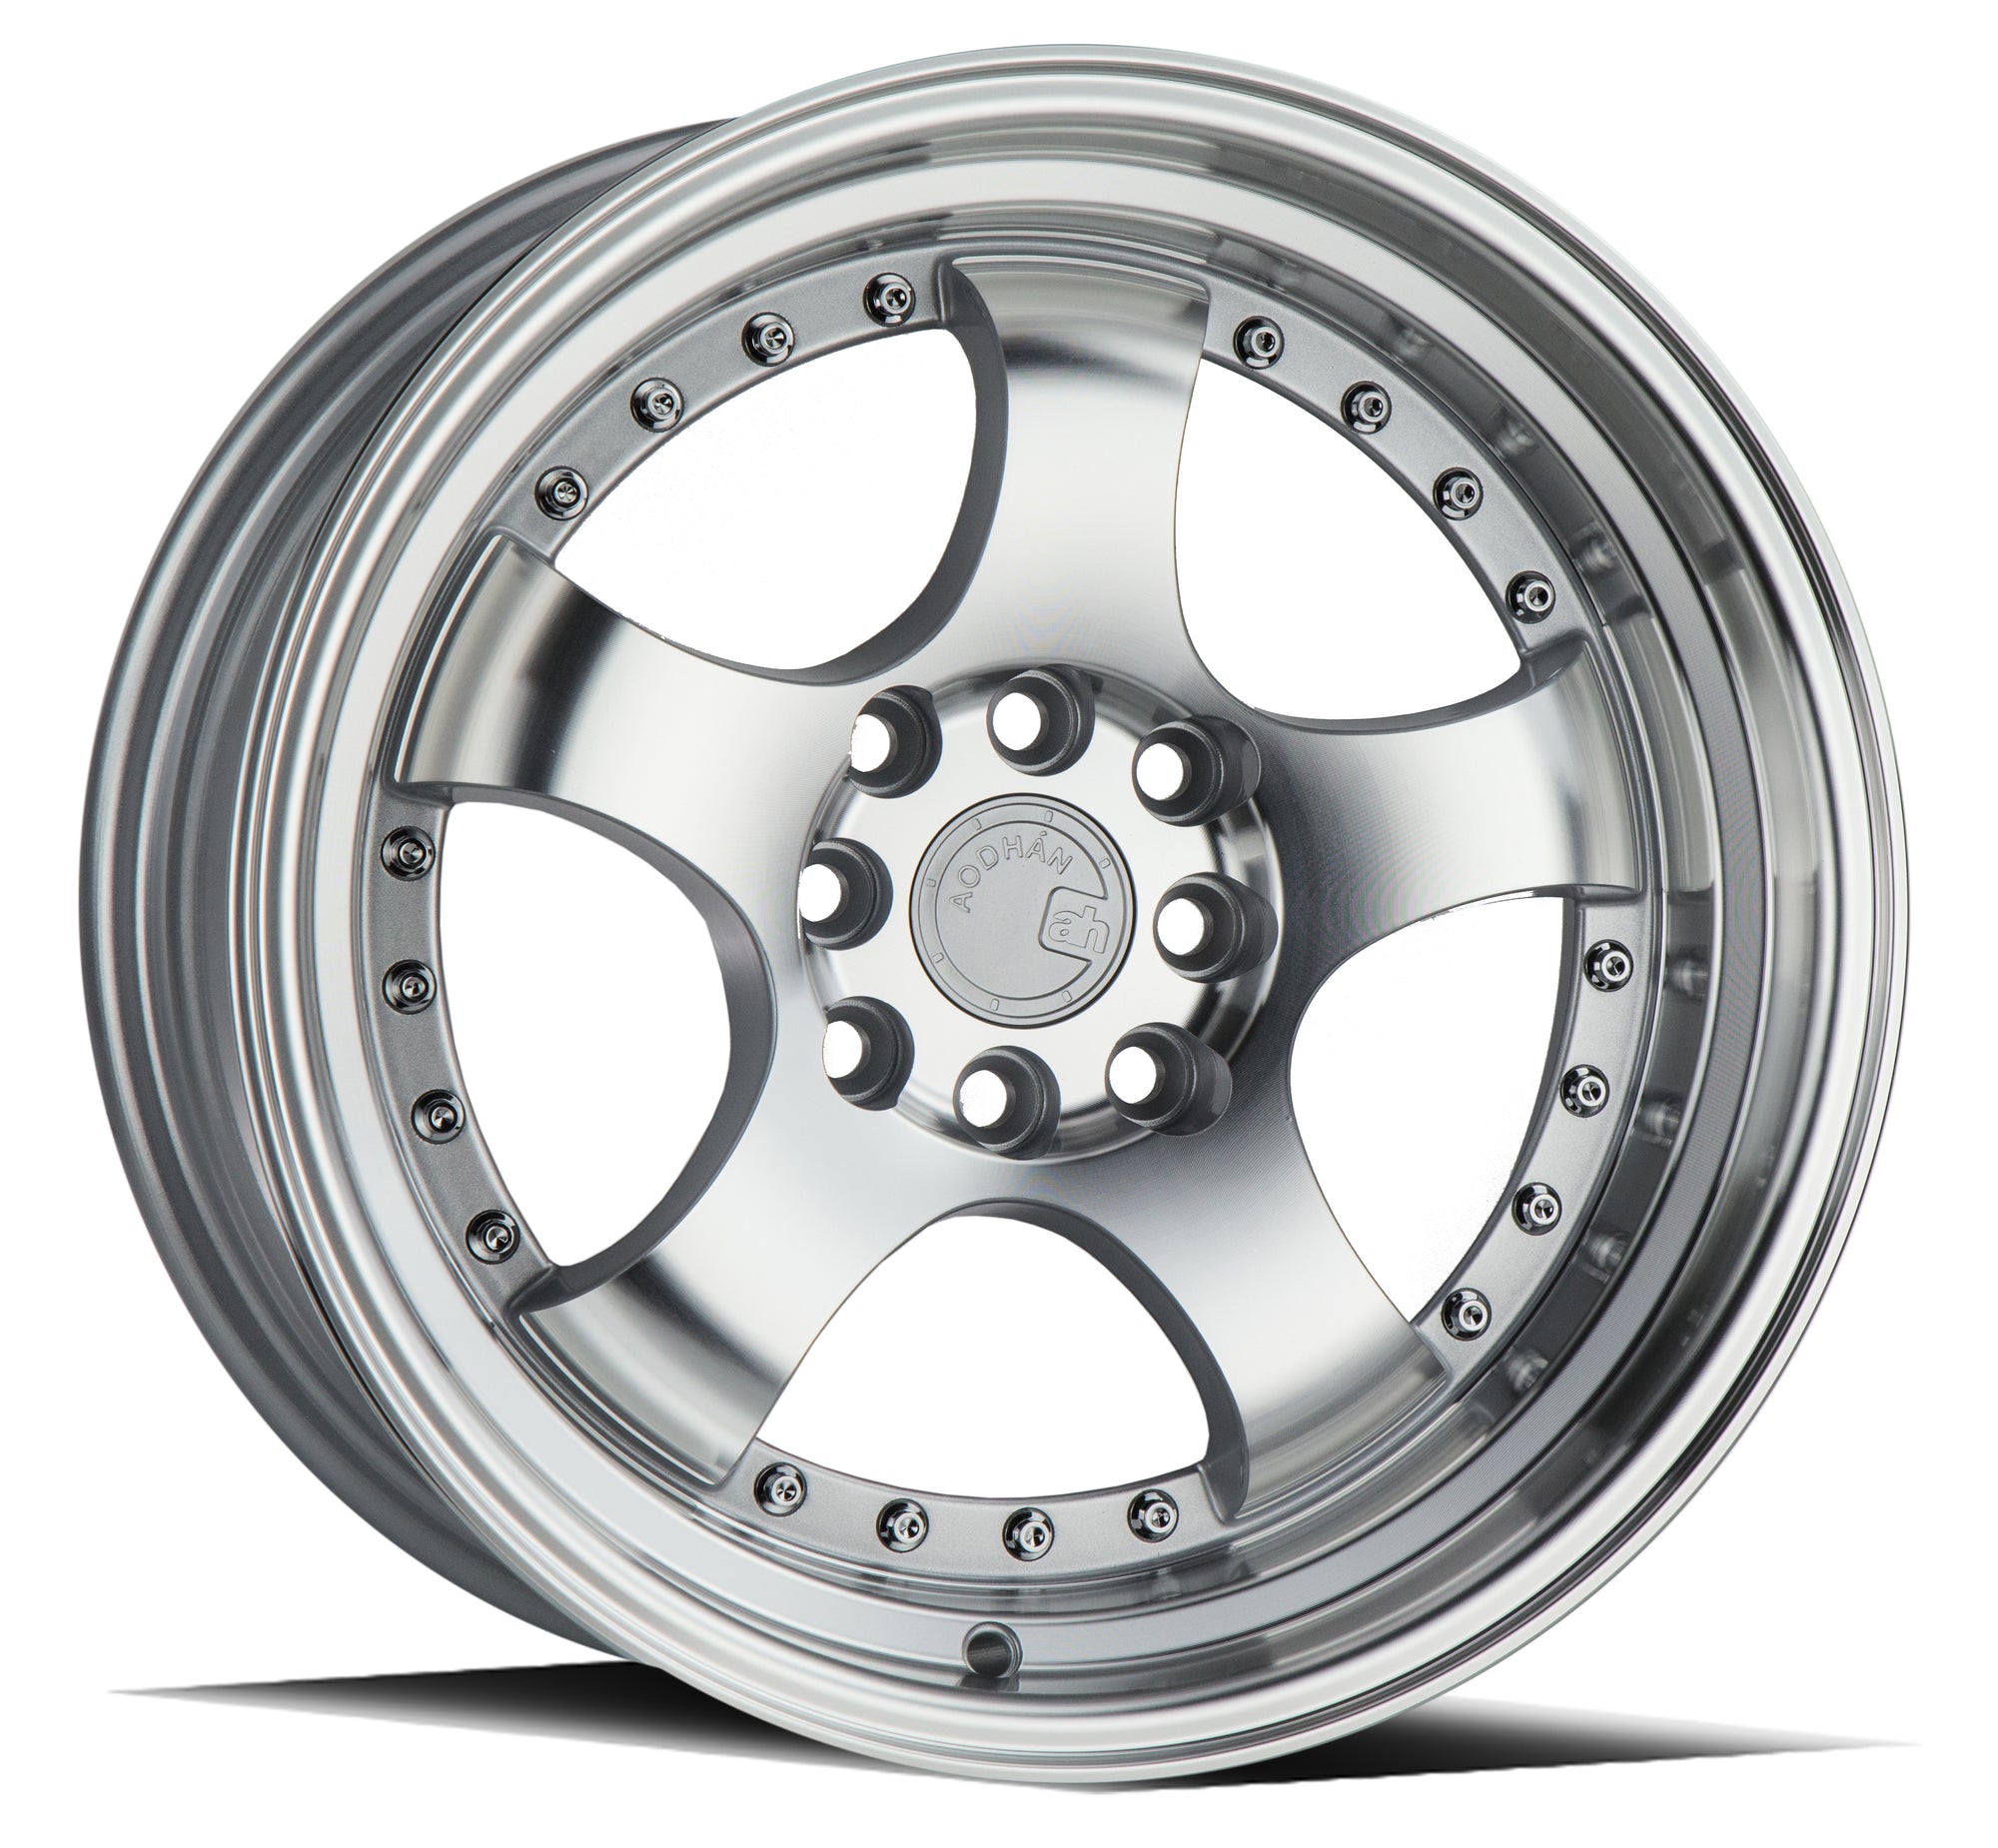 Aodhan AH03 16x8 4x100/114.3 +15 Silver Machined Face And Lip